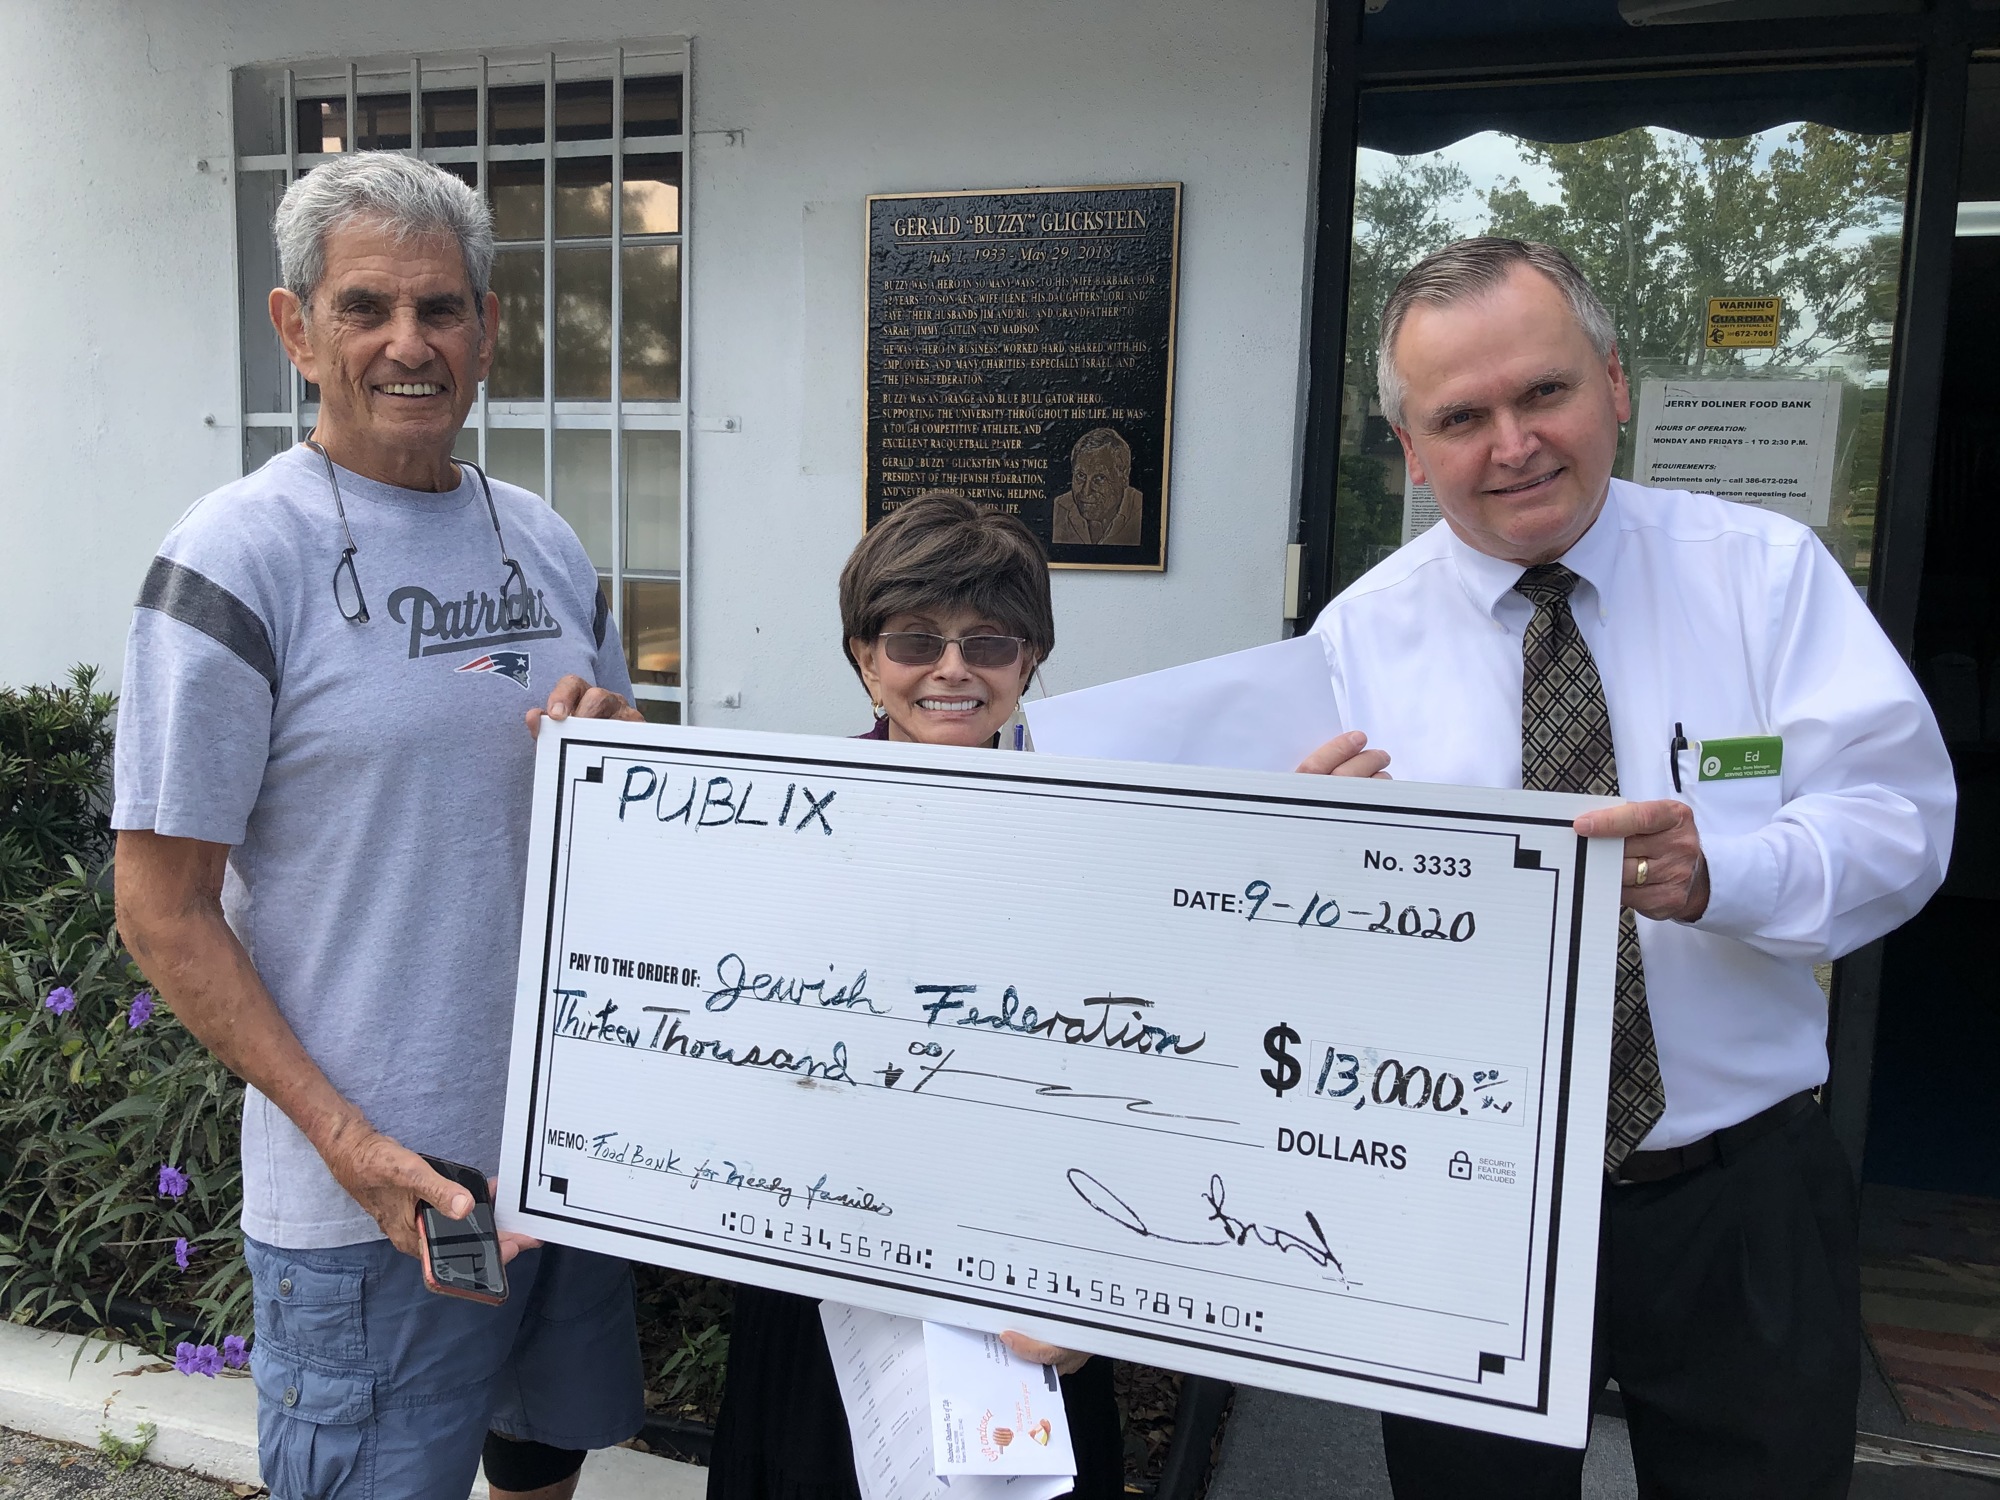 Publix Ormond Towne Square Assistant Store Manager Ed Barthpresents a check to Jewish Federation President Marvin Miller and Executive Director Gloria Max. Courtesy photo